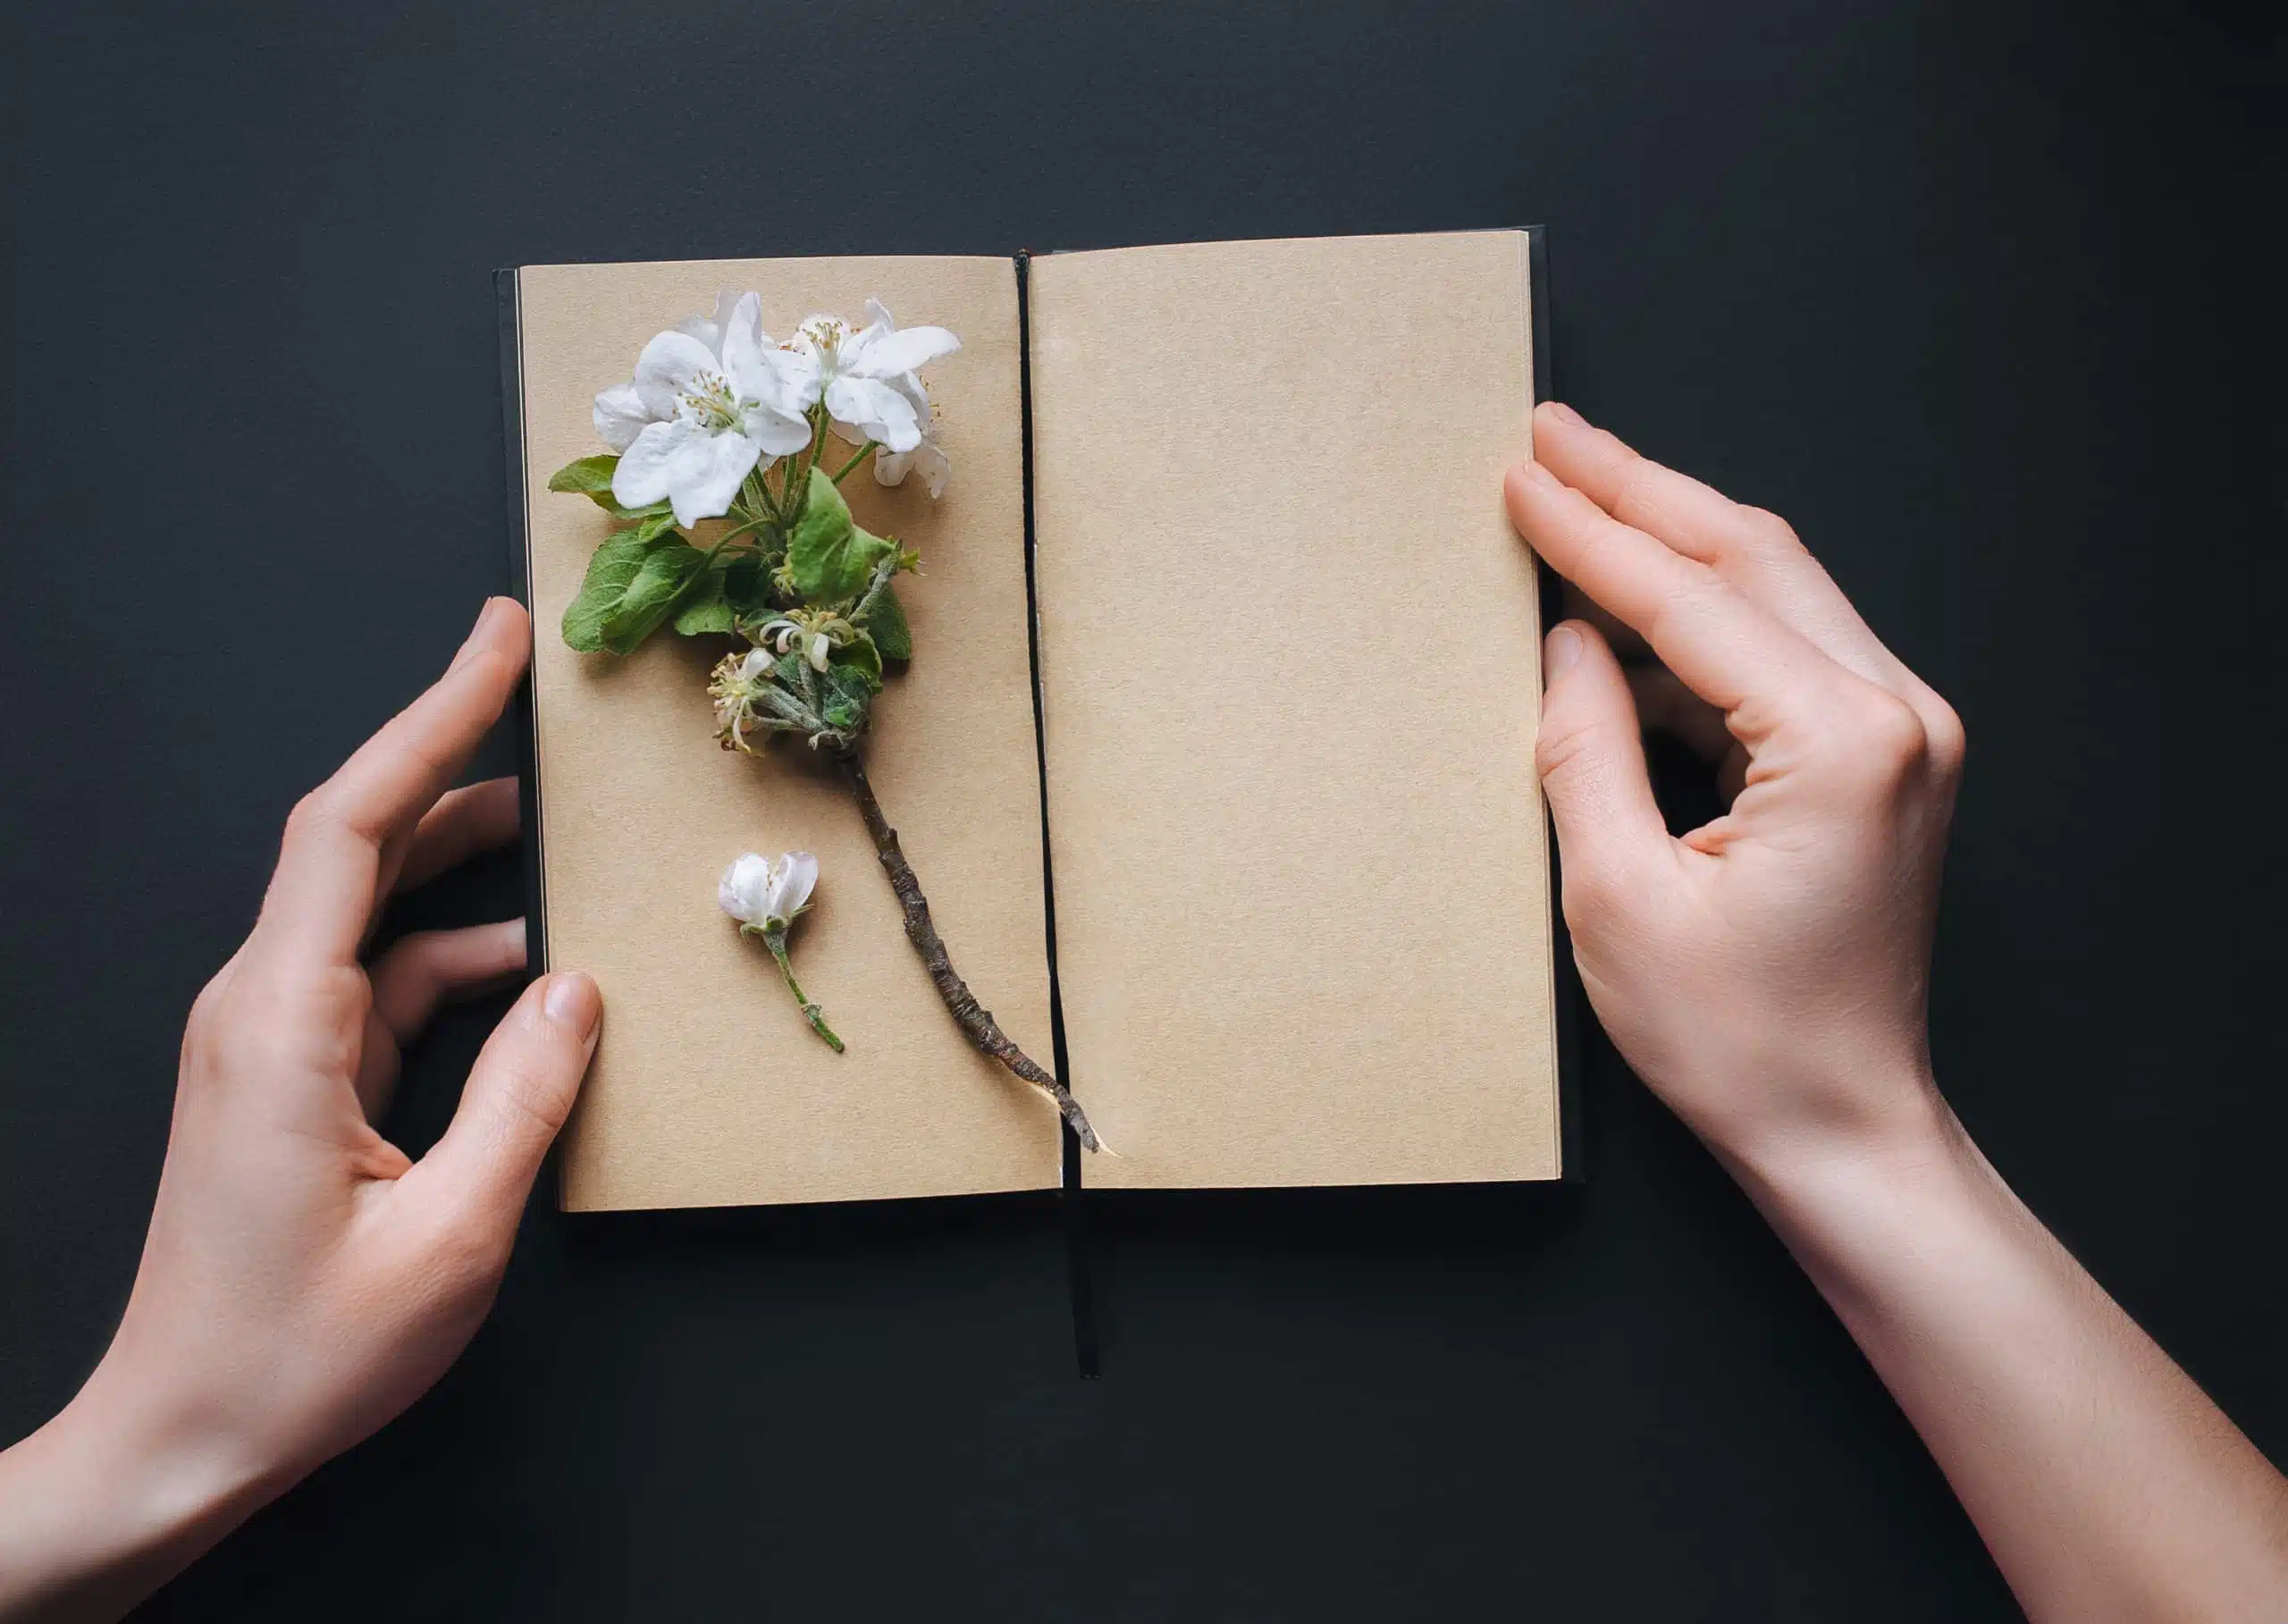 Female hand touch a beige notebook with a sprig of a apple tree blossoms.